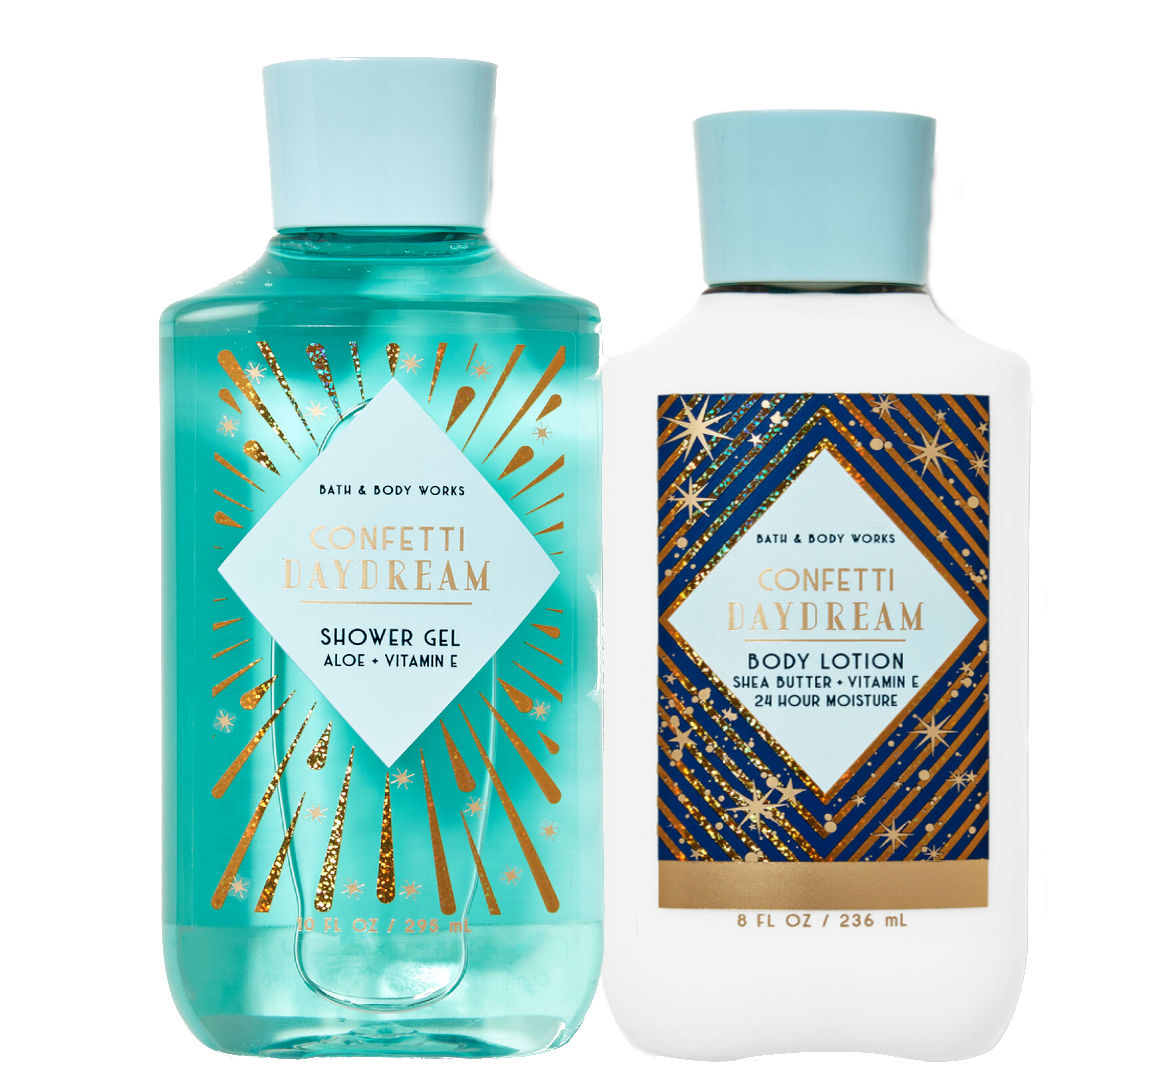 Primary image for Bath & Body Works Confetti Daydream Body Lotion + Shower Gel Duo Set